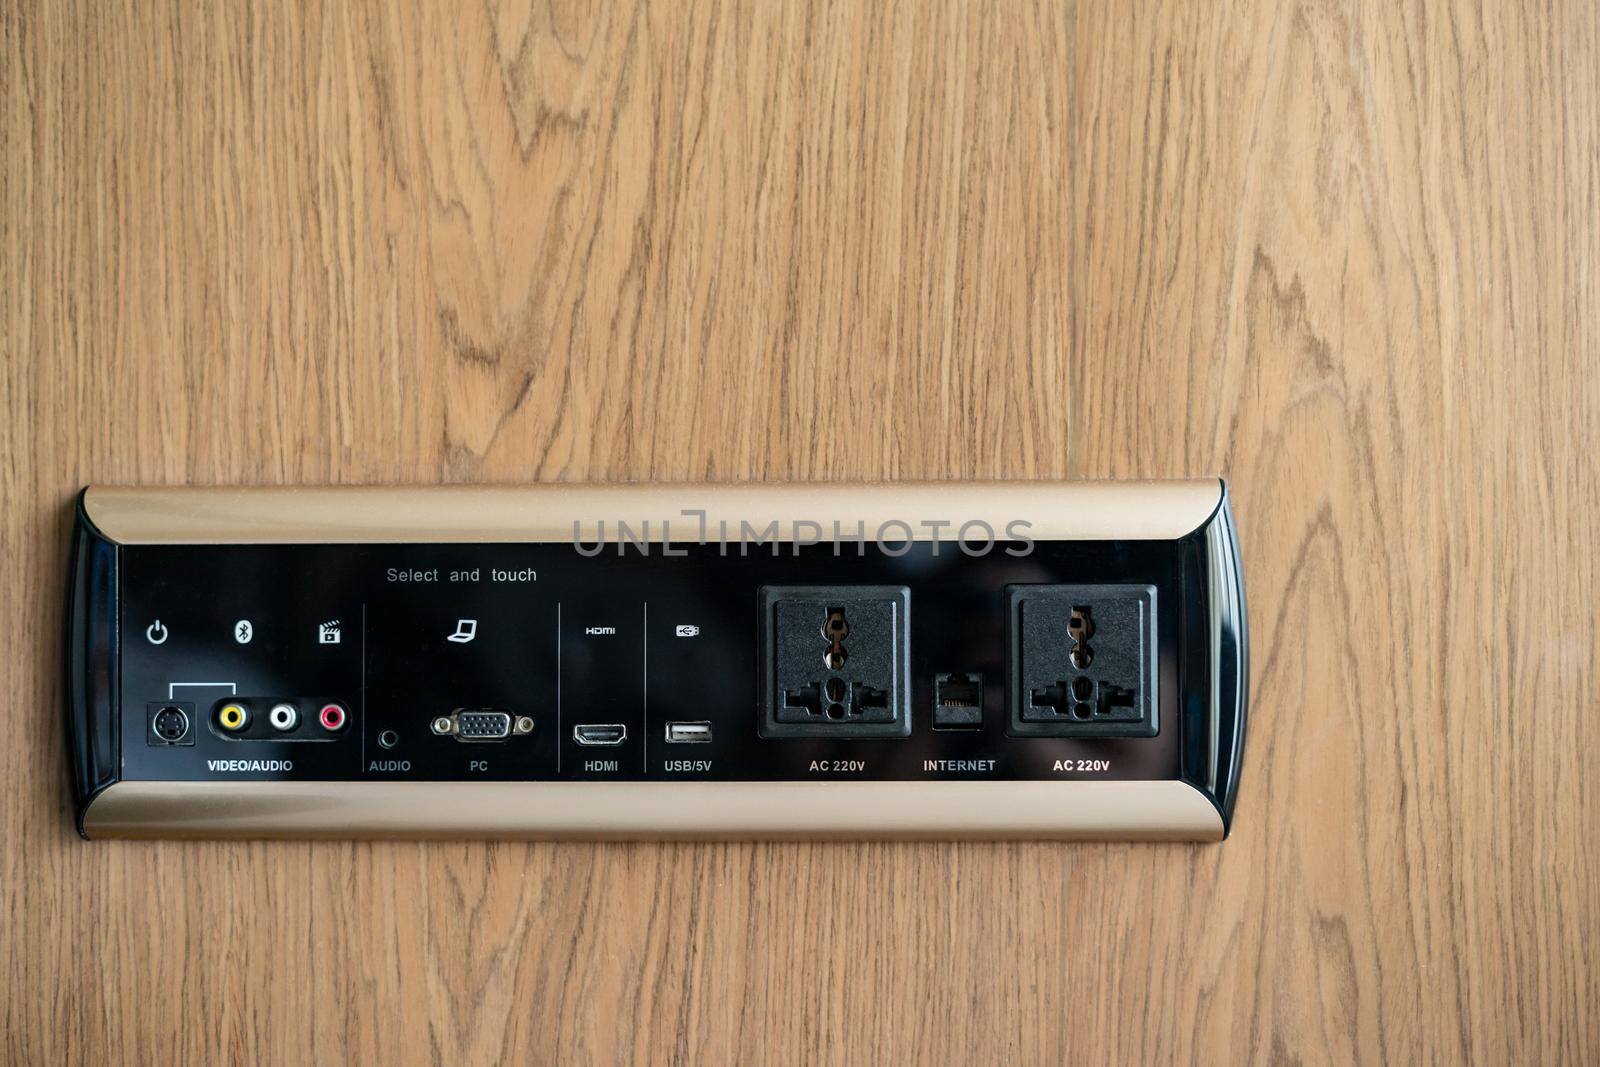 Electrical wall socket adapter, plug power outlet and USB charger socket on the wooden wall.